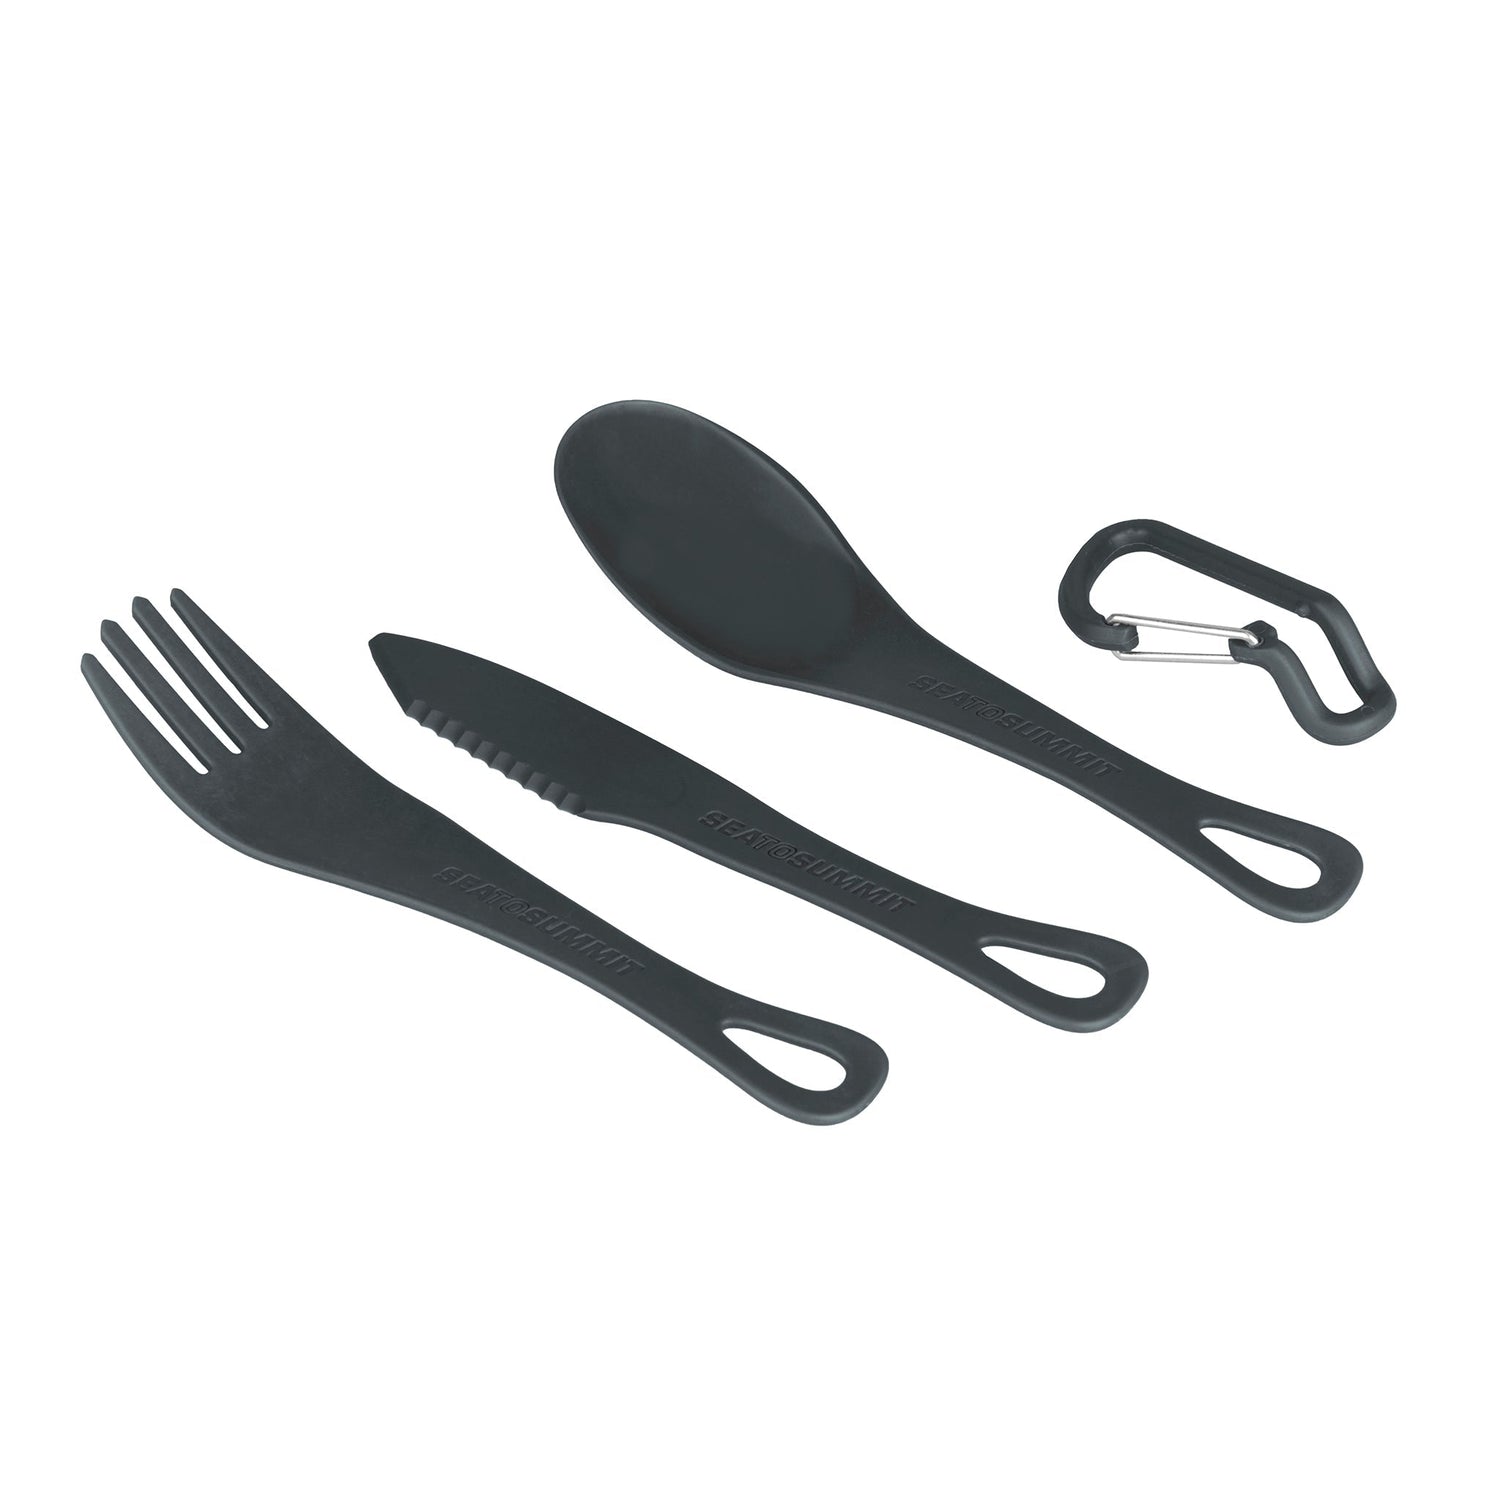 Delta Light Camp Set 2.2 _ two person camping dinner set _ cutlery grayDelta Light Camp Set 2.2 _ two person camping dinner set _ cutlery gray